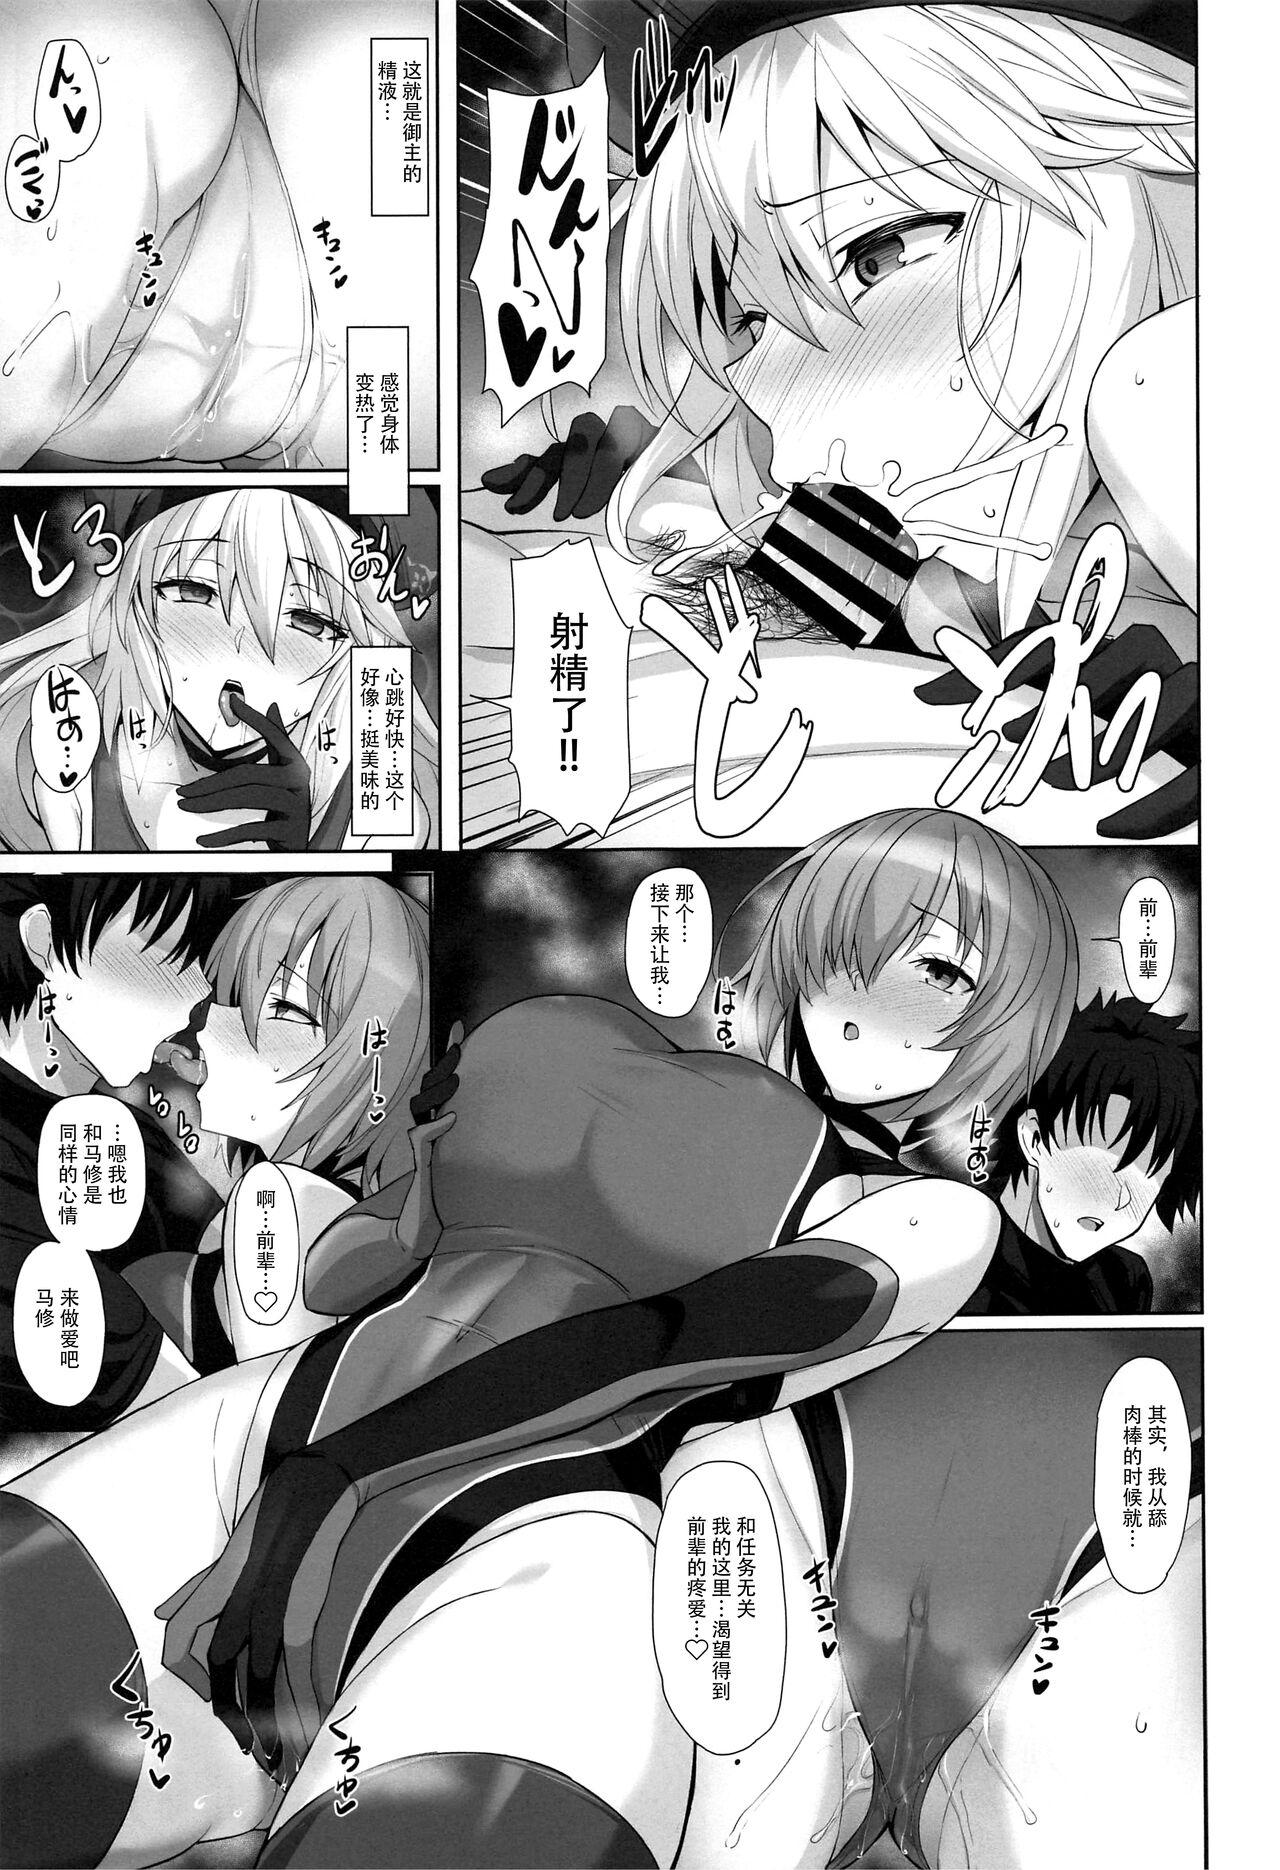 Maid Kyouei Tokusei no Servant to 2 - Fate grand order Livesex - Page 8